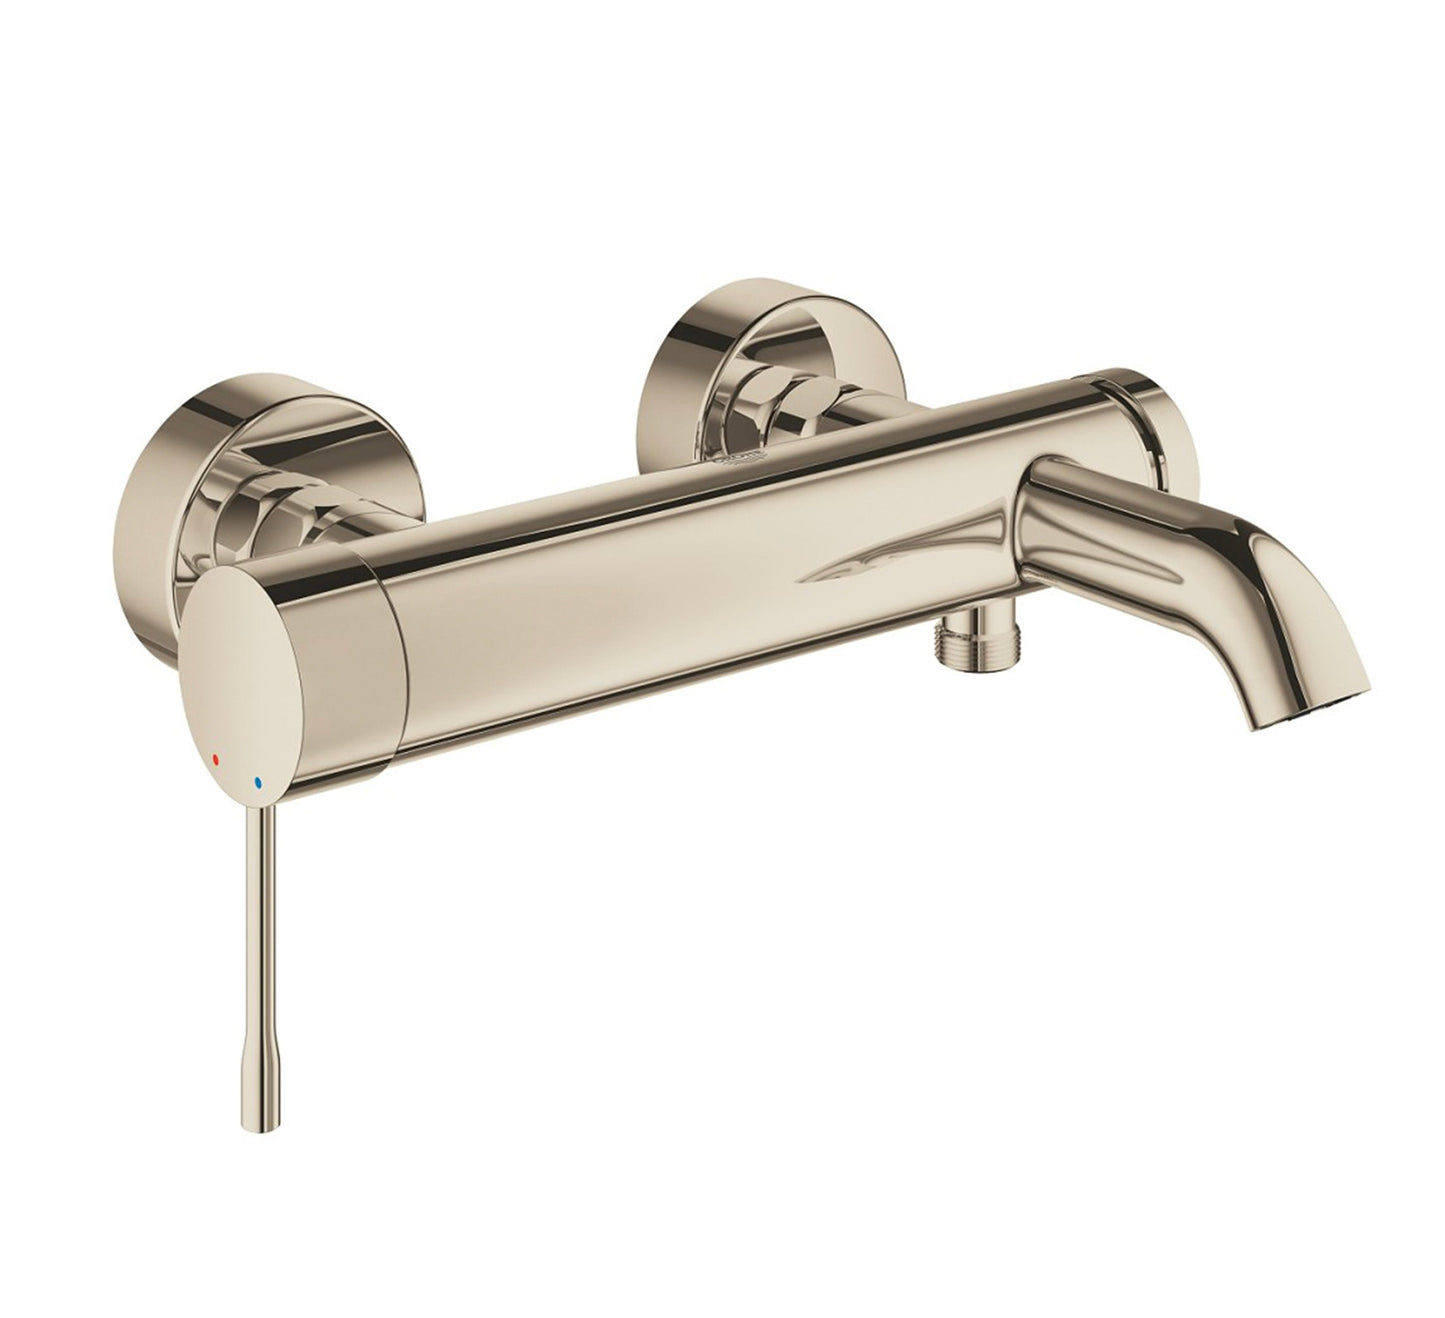 GROHE ESSENCE NEW BATH MIXER/SHOWER MIXER 1/2" POLISHED NICKLE - 33624BE1